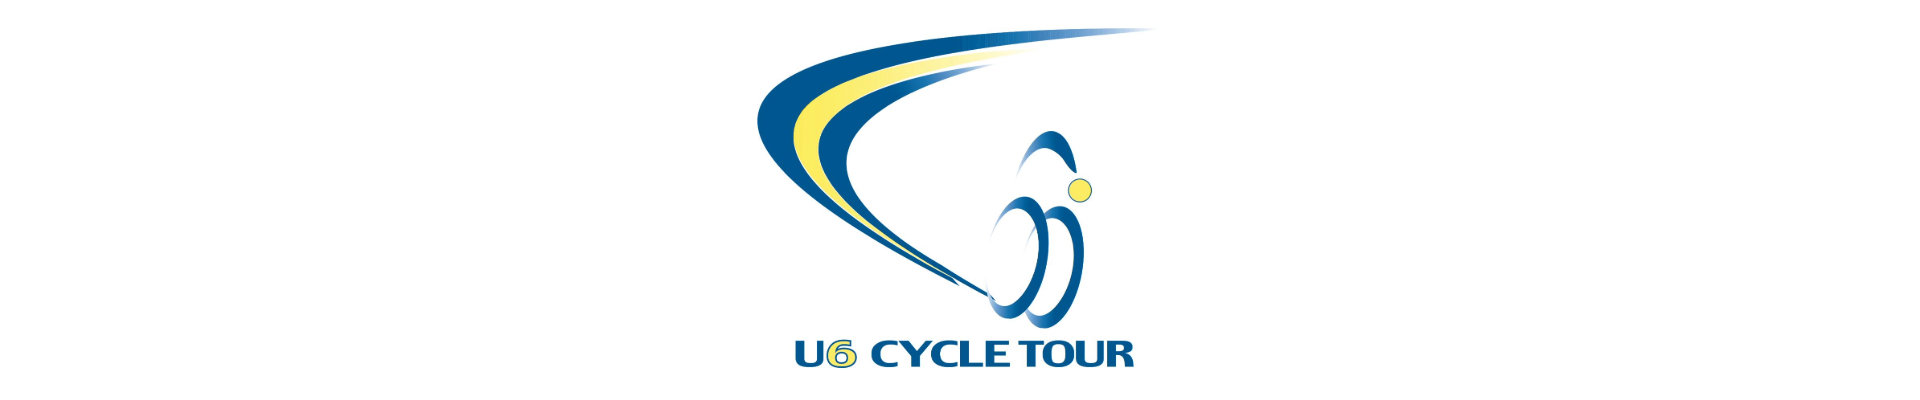 U6 Cycle Tour - stage 3